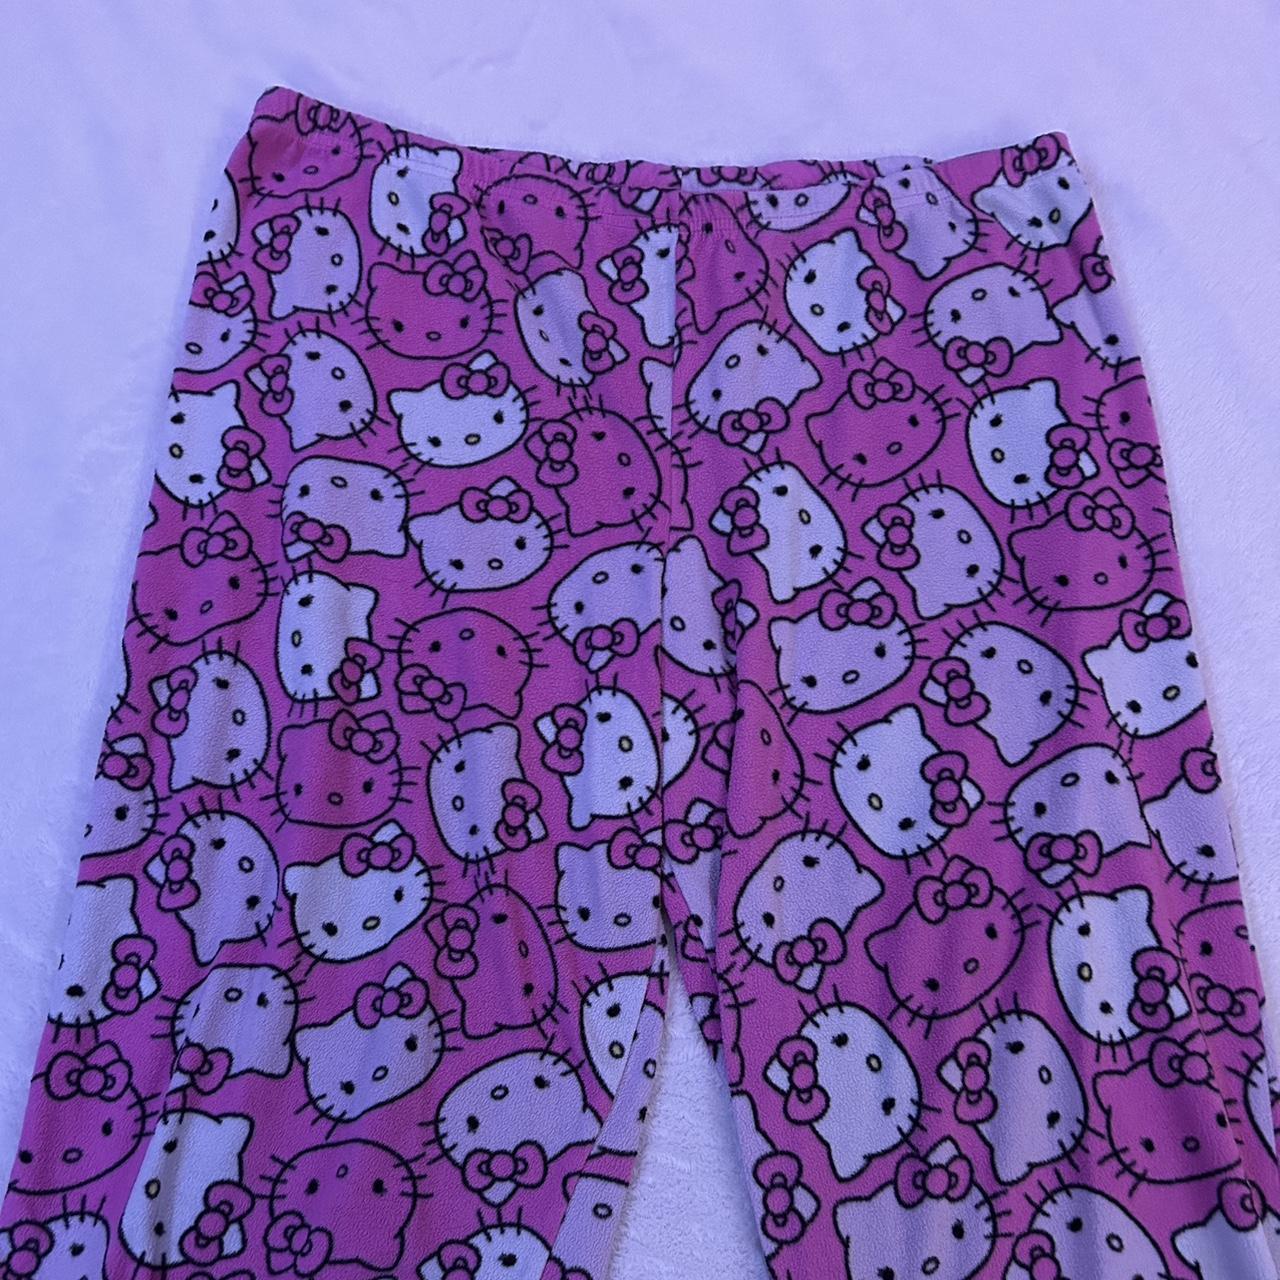 Women's Pink and White Bottoms | Depop